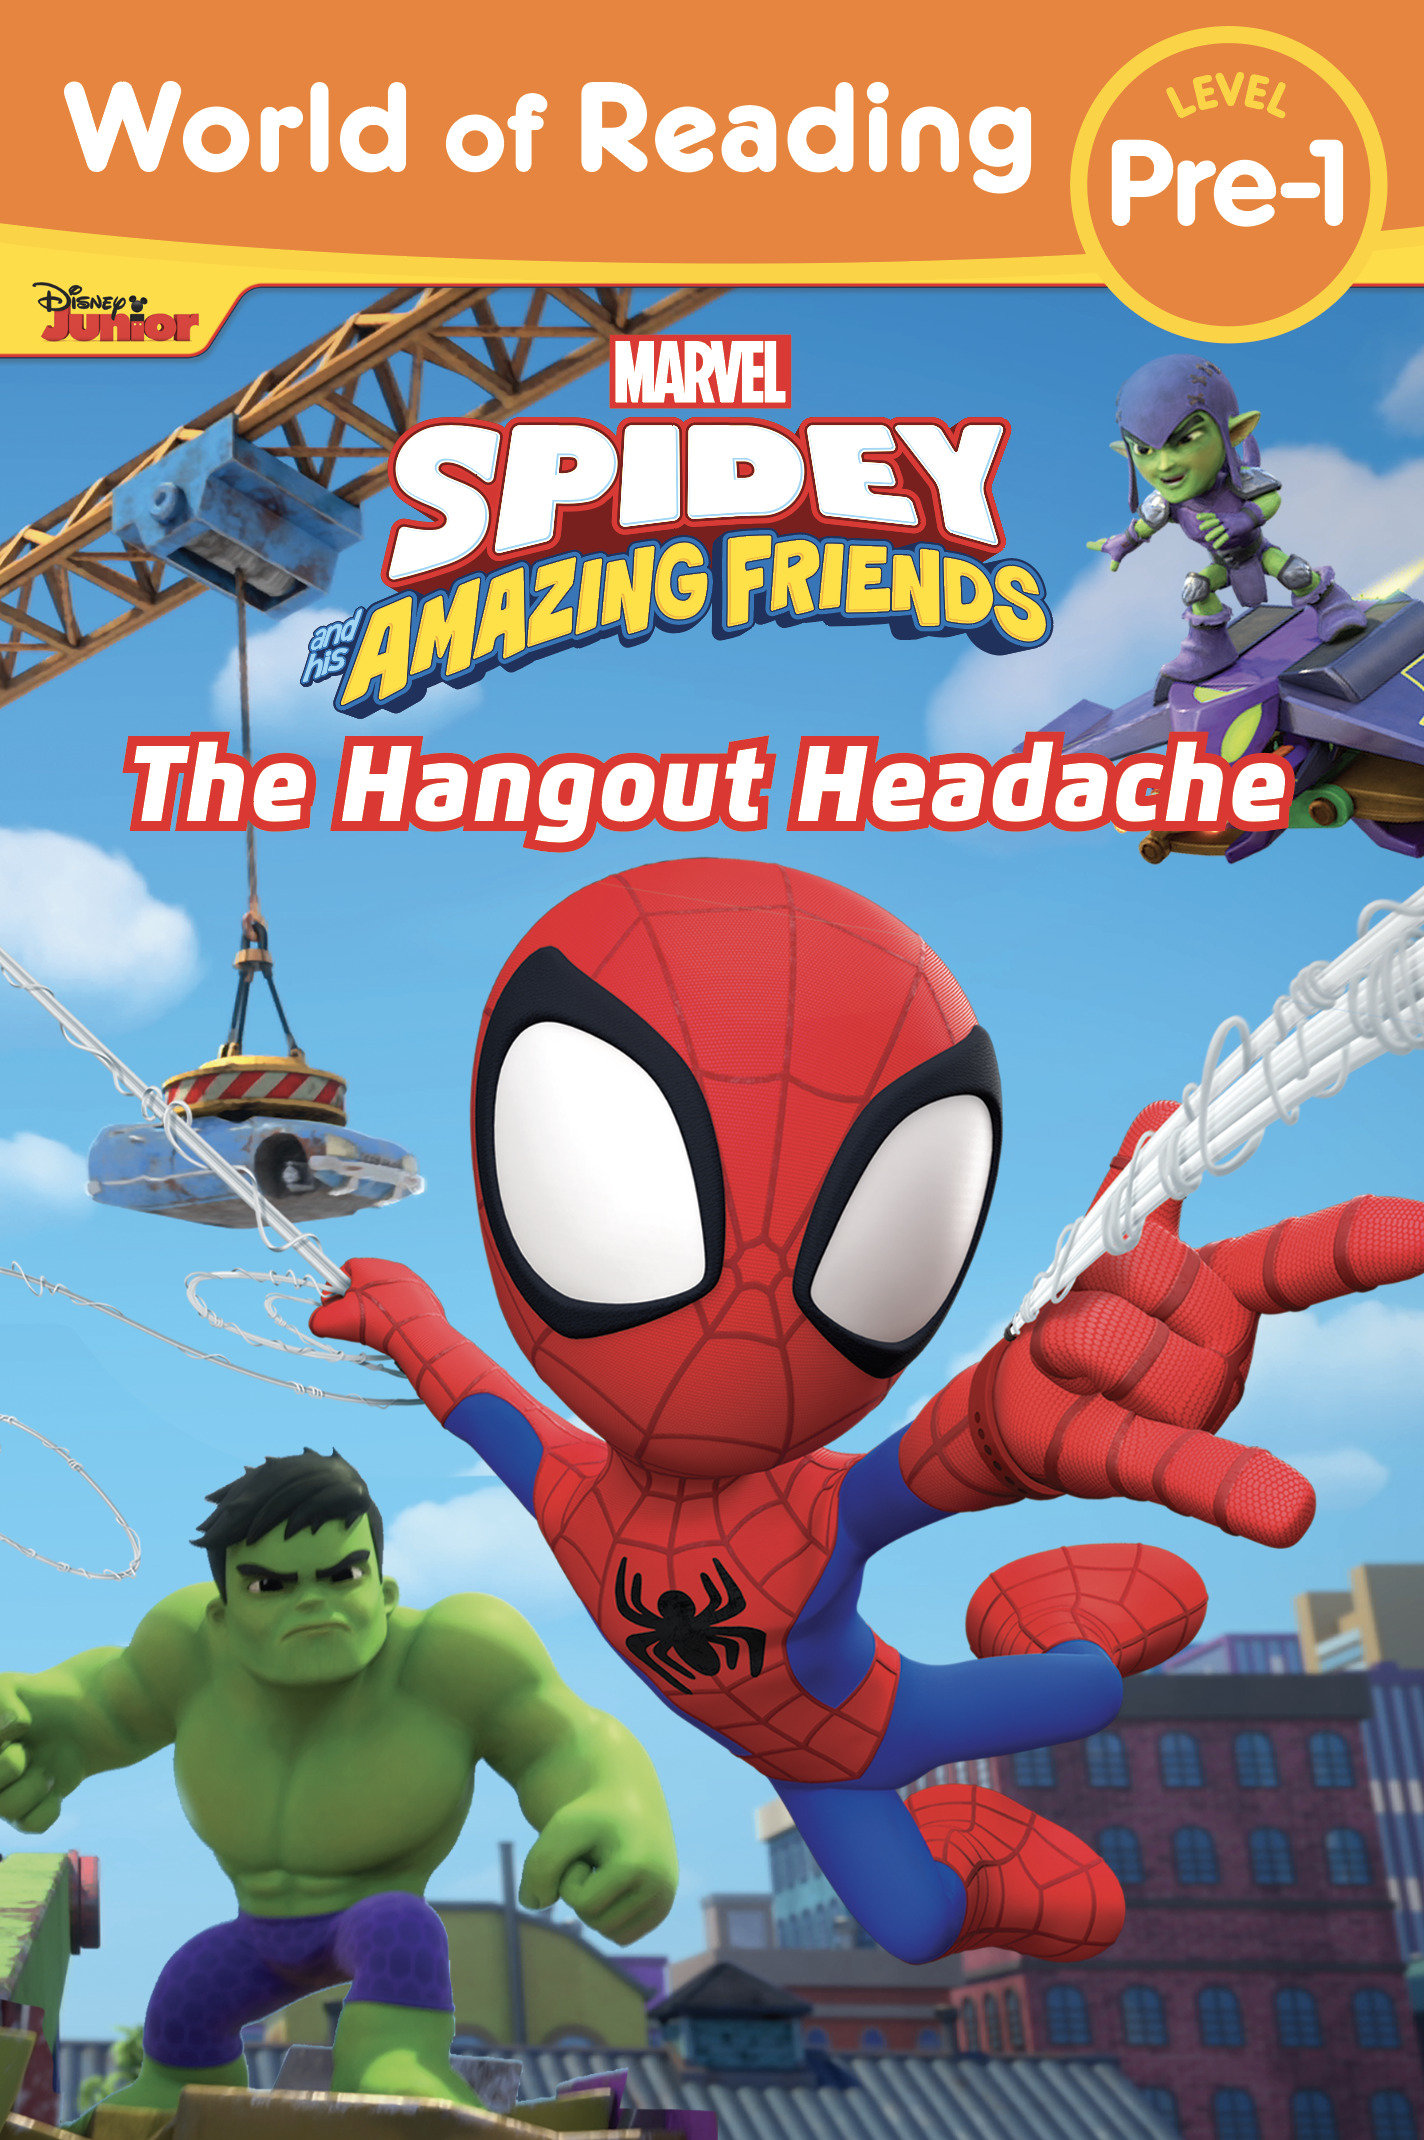 World of Reading Volume 3 Spidey and His Amazing Friends: The Hangout Headache